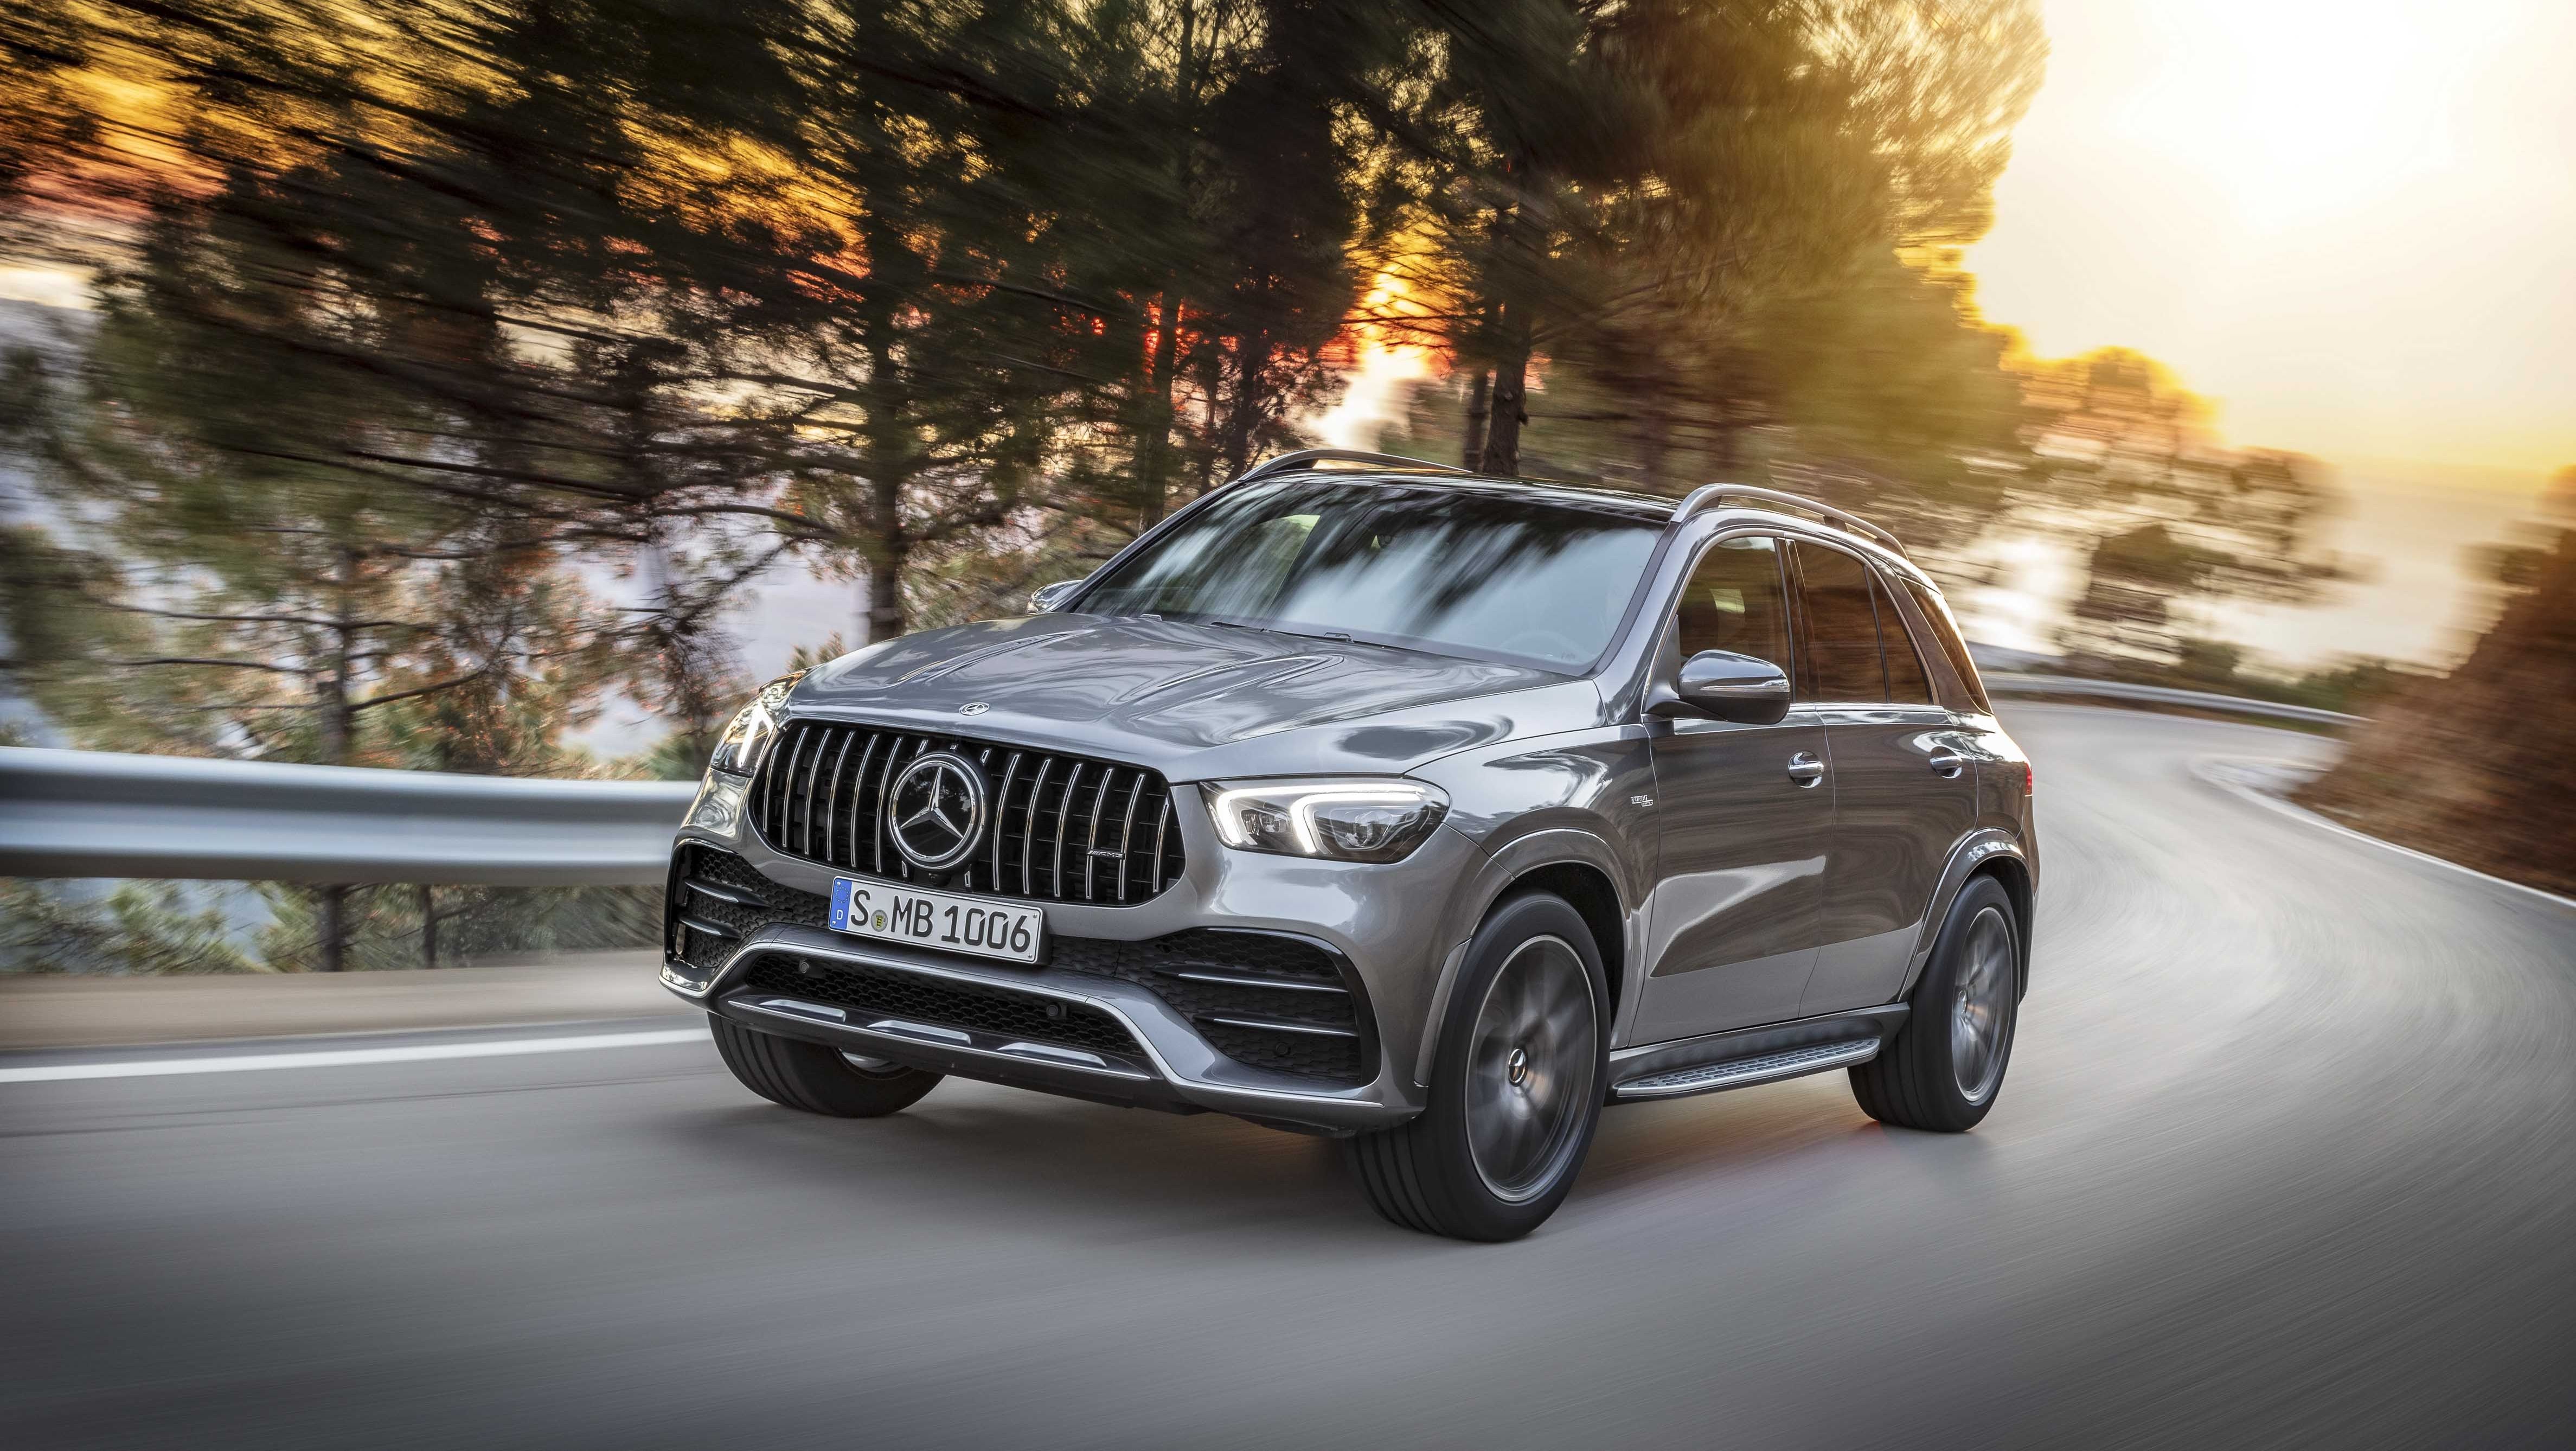 2019 The 453-Horsepower 2020 Mercedes-AMG GLE53 is Proof You Don't Need a Sports Car to Have Fun